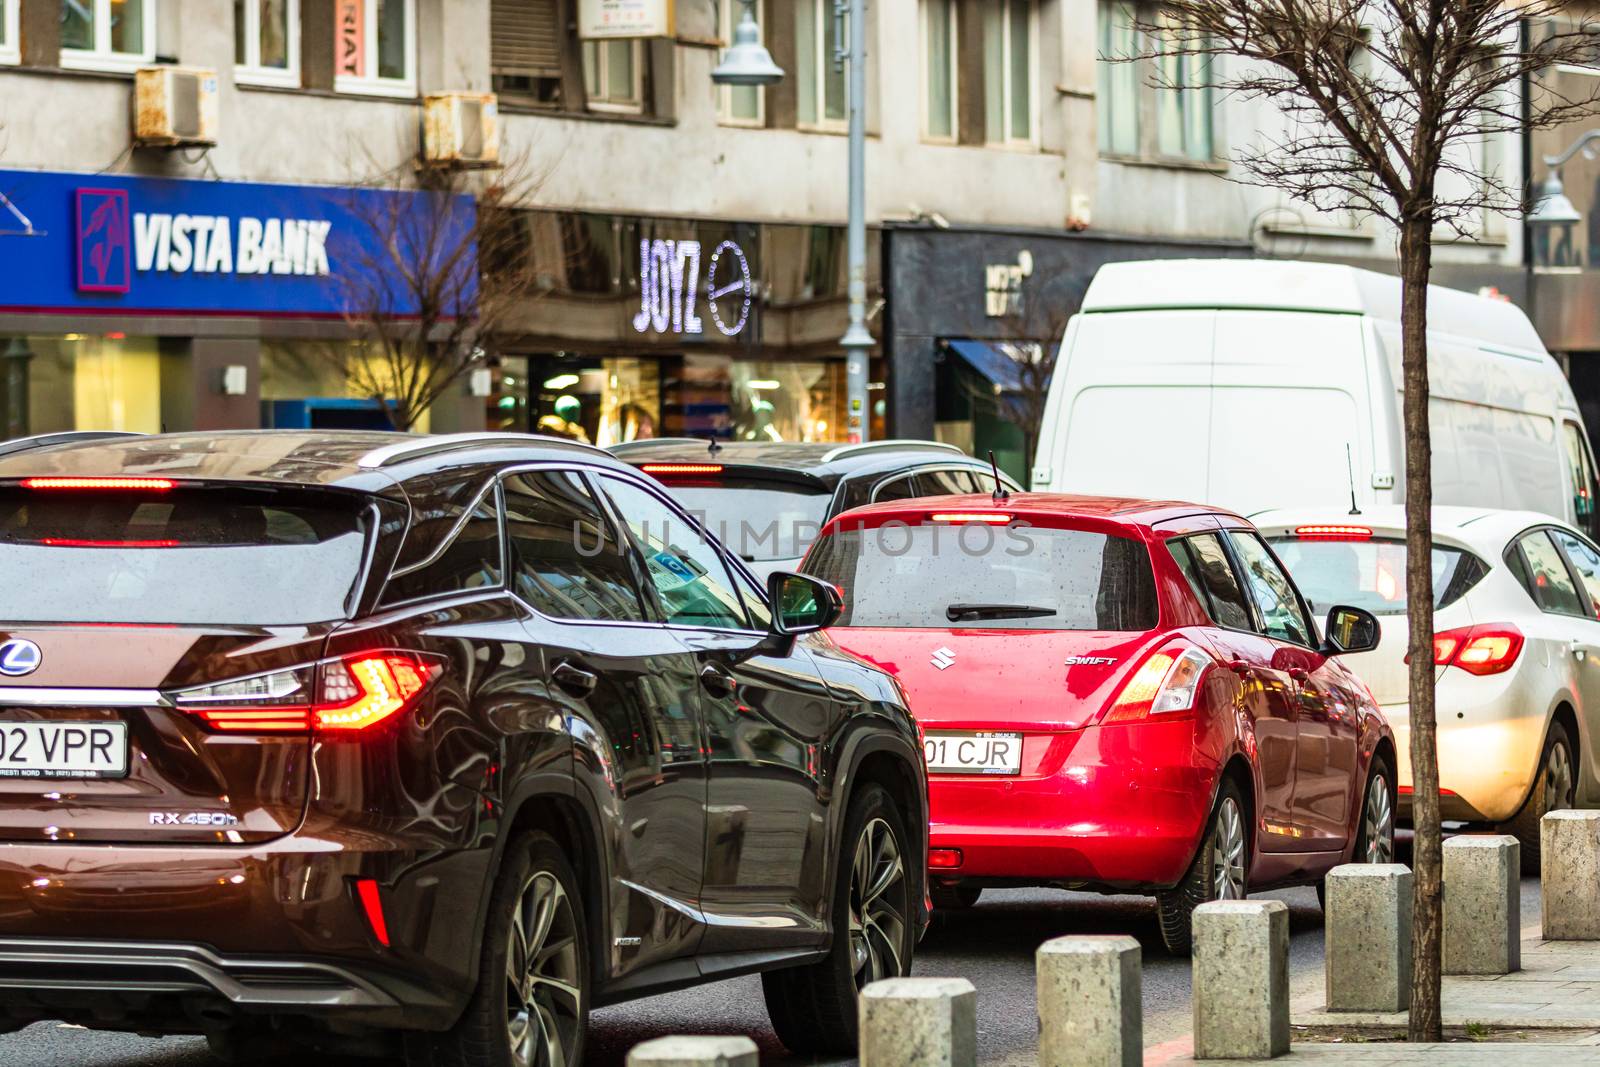 Car traffic at rush hour in downtown area of the city. Car pollution, traffic jam in the morning and evening in the capital city of Bucharest, Romania, 2020